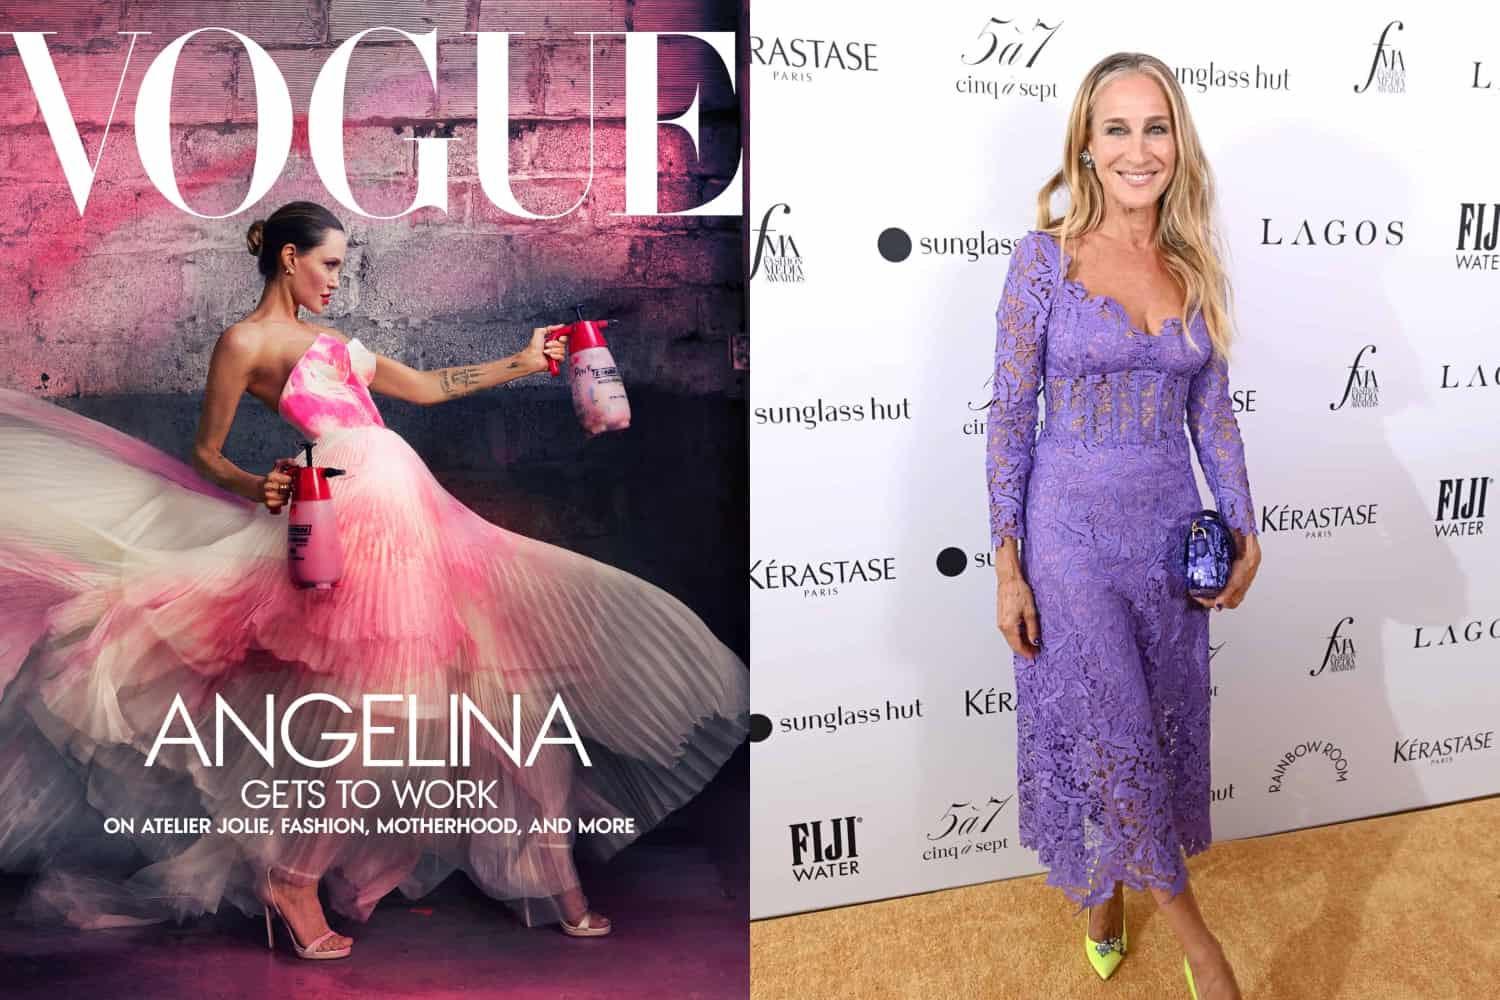 Angelina Jolie's Vogue Cover, SJP To Host The CFDA Fashion Awards, An Honor  For Mr. Valentino, Dior's Big Bash, And More! - Daily Front Row